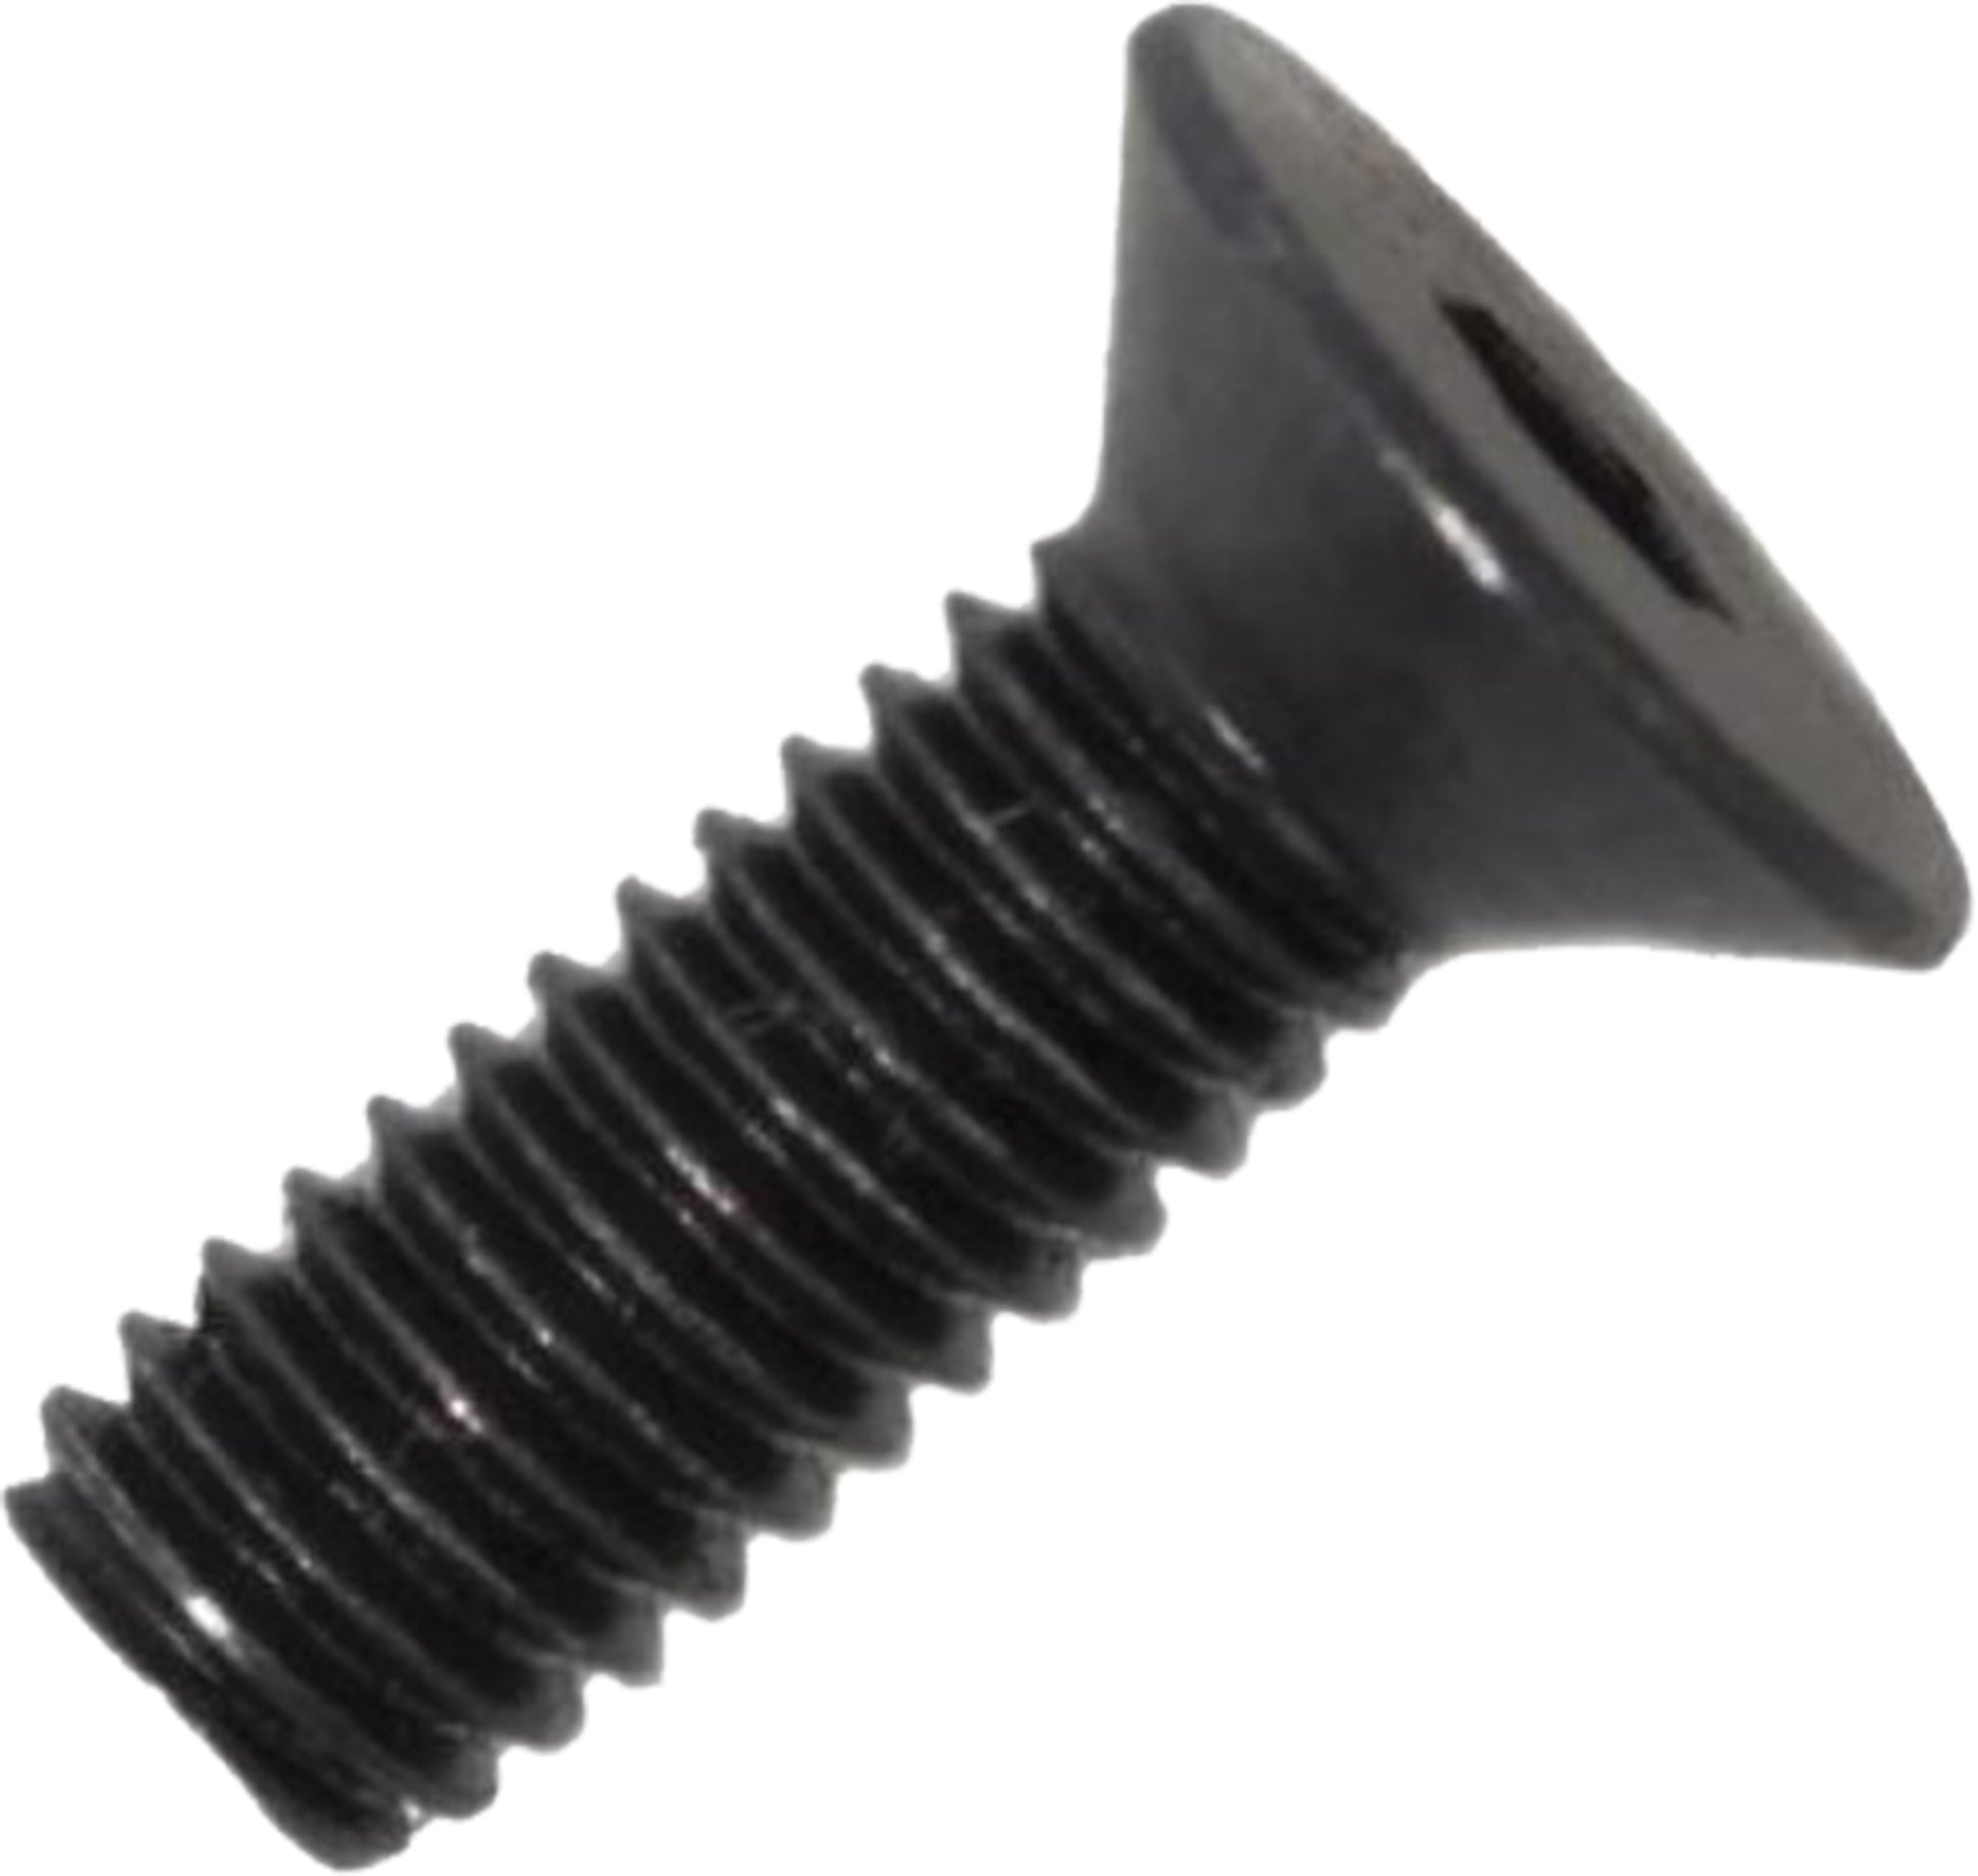 BDU280 Cable Protector Fixing Screw